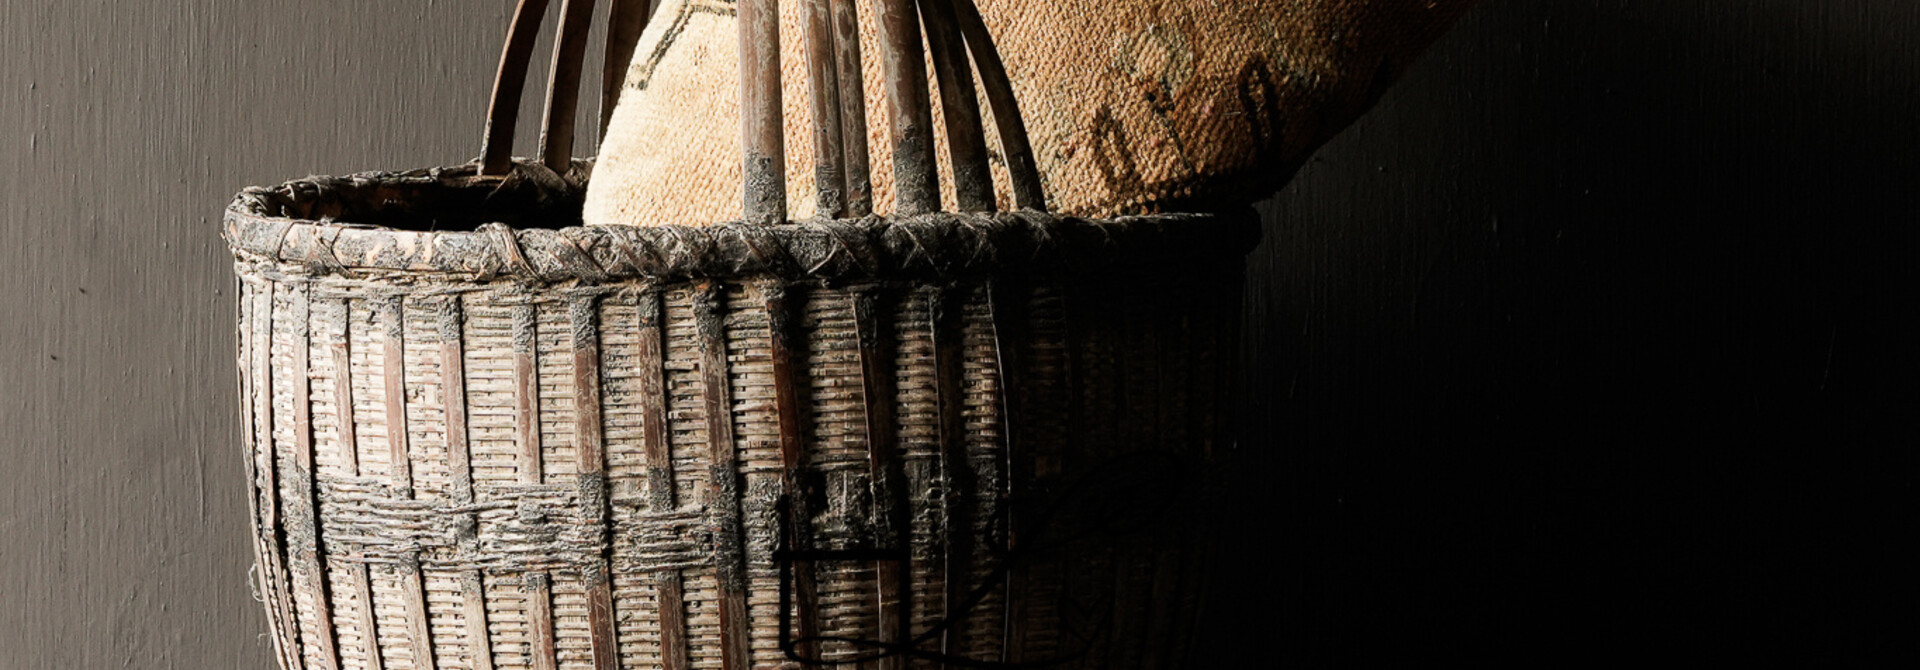 Old Authentic Wicker basket